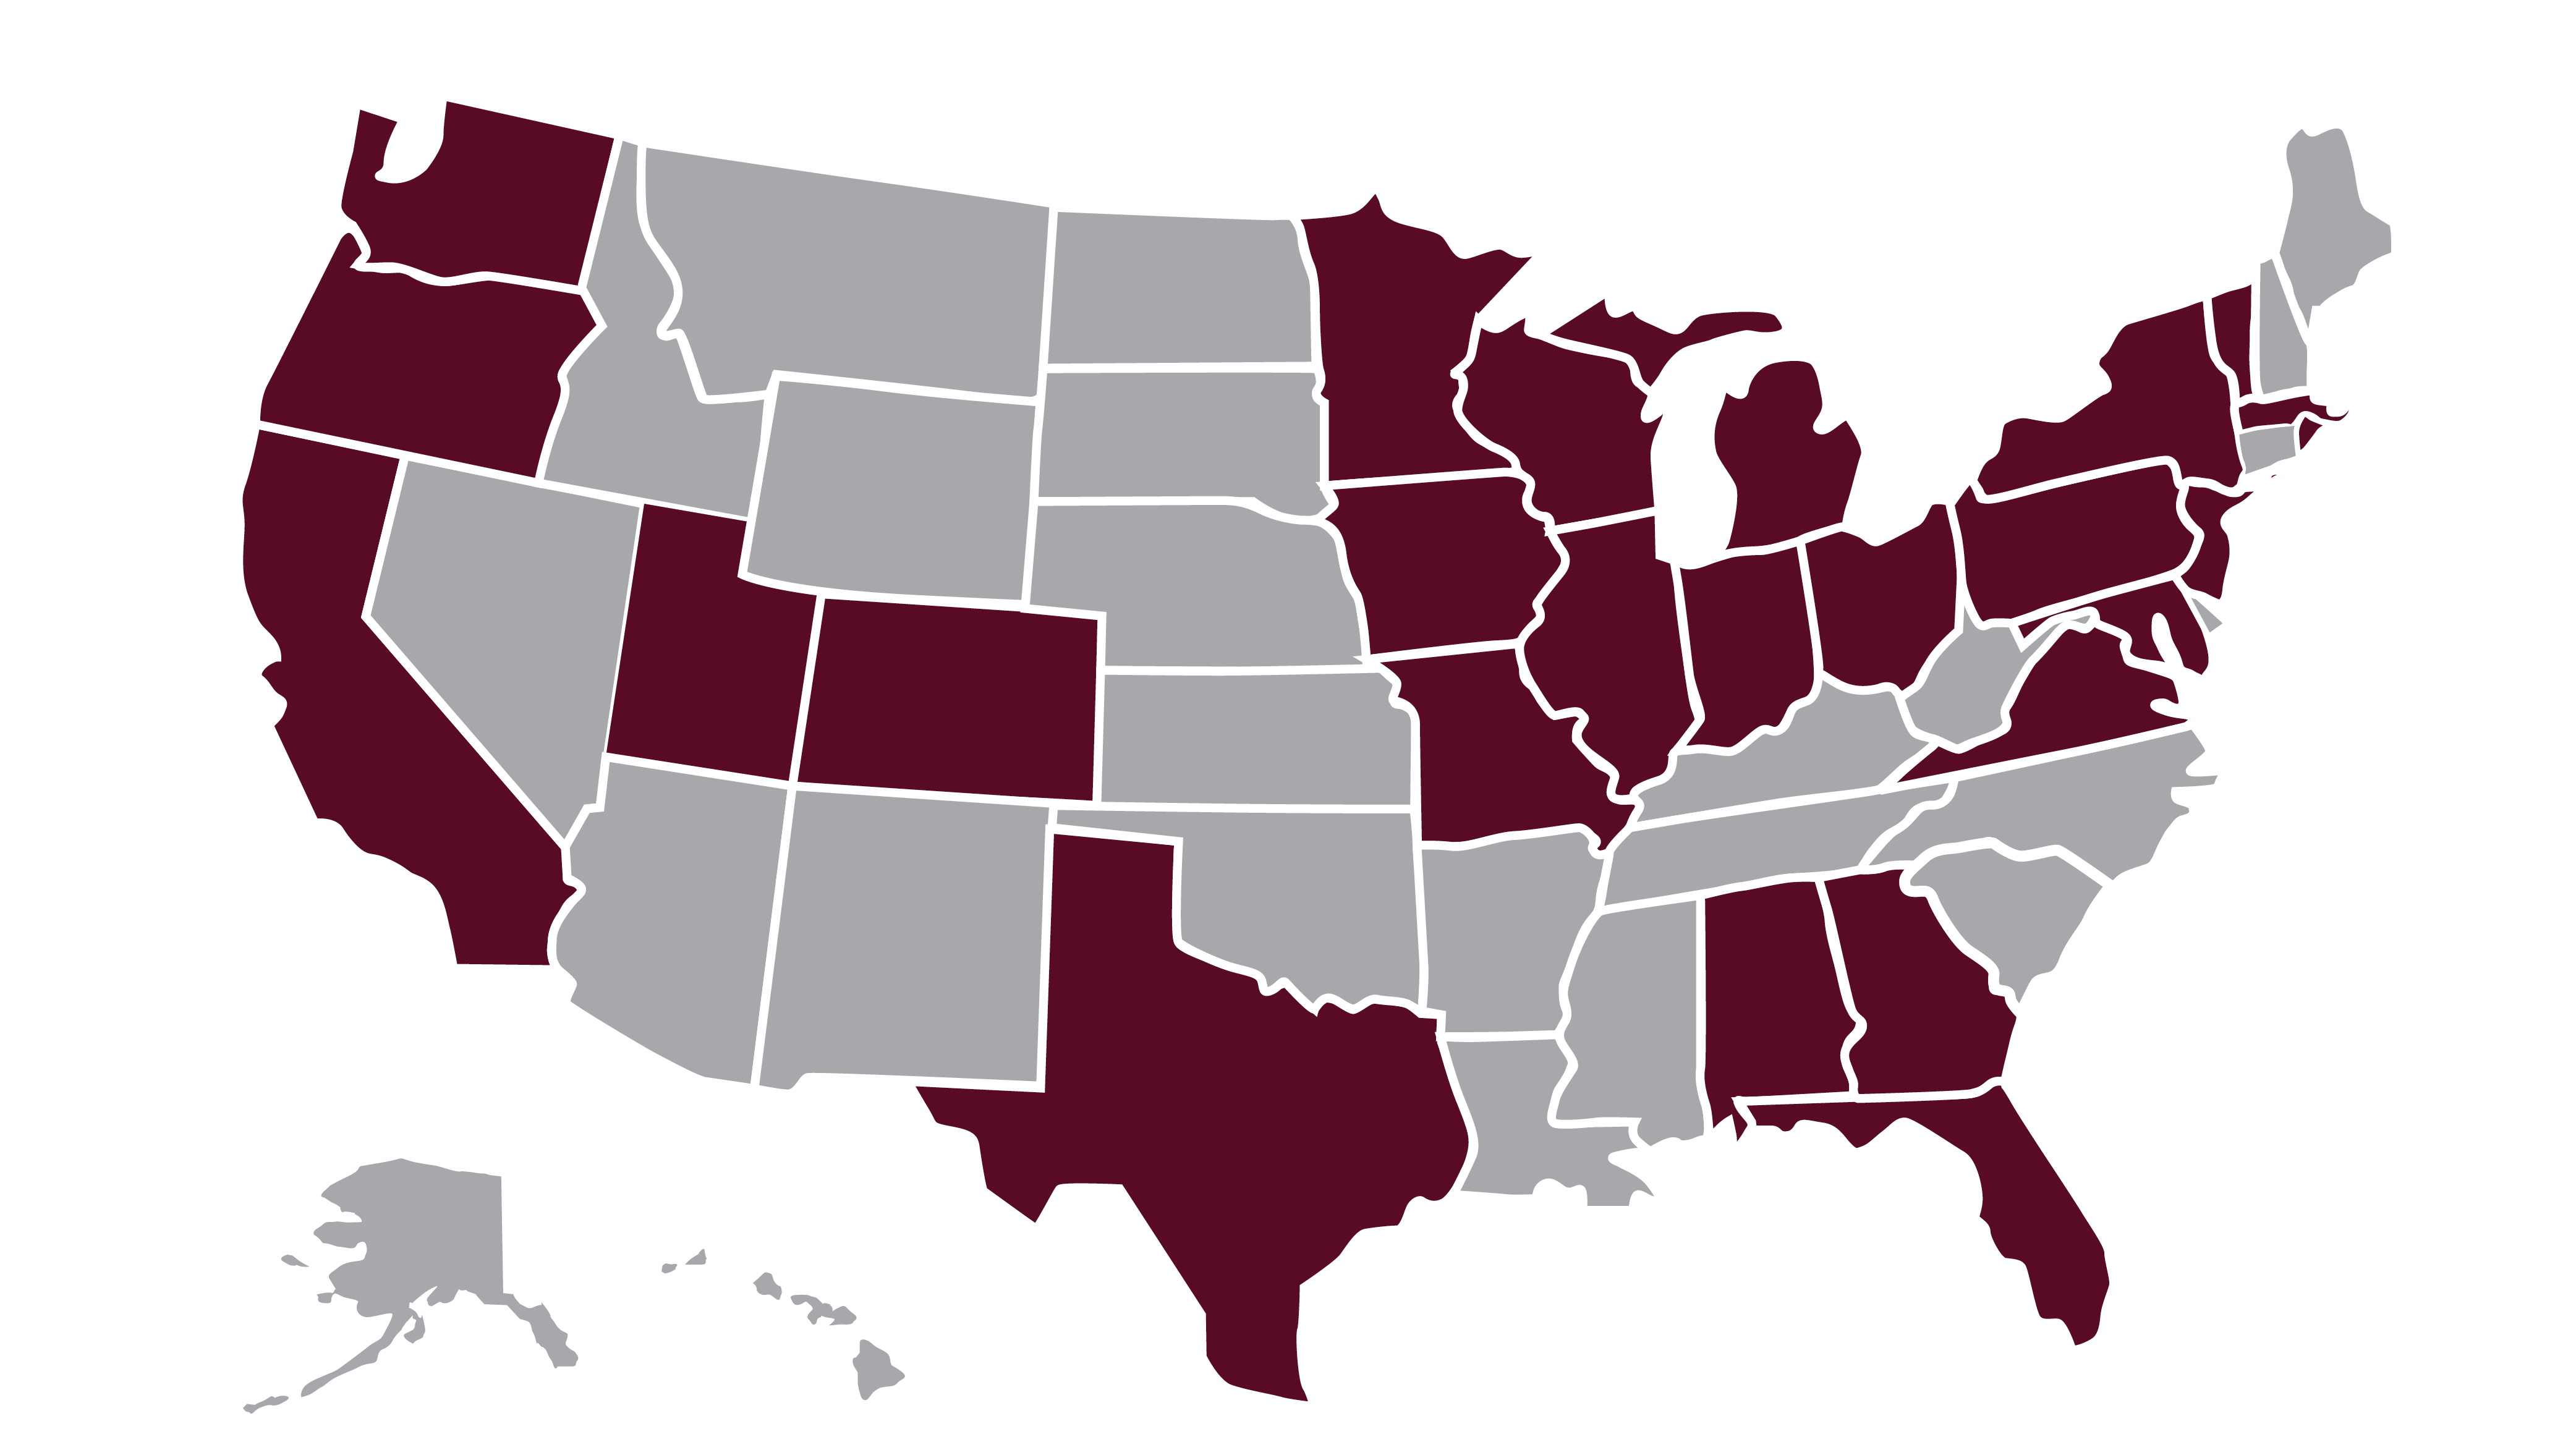 Illustrated map of the United States, using a mix of Loyola Chicago brand colors of gray and maroon, to represent map creative standards.